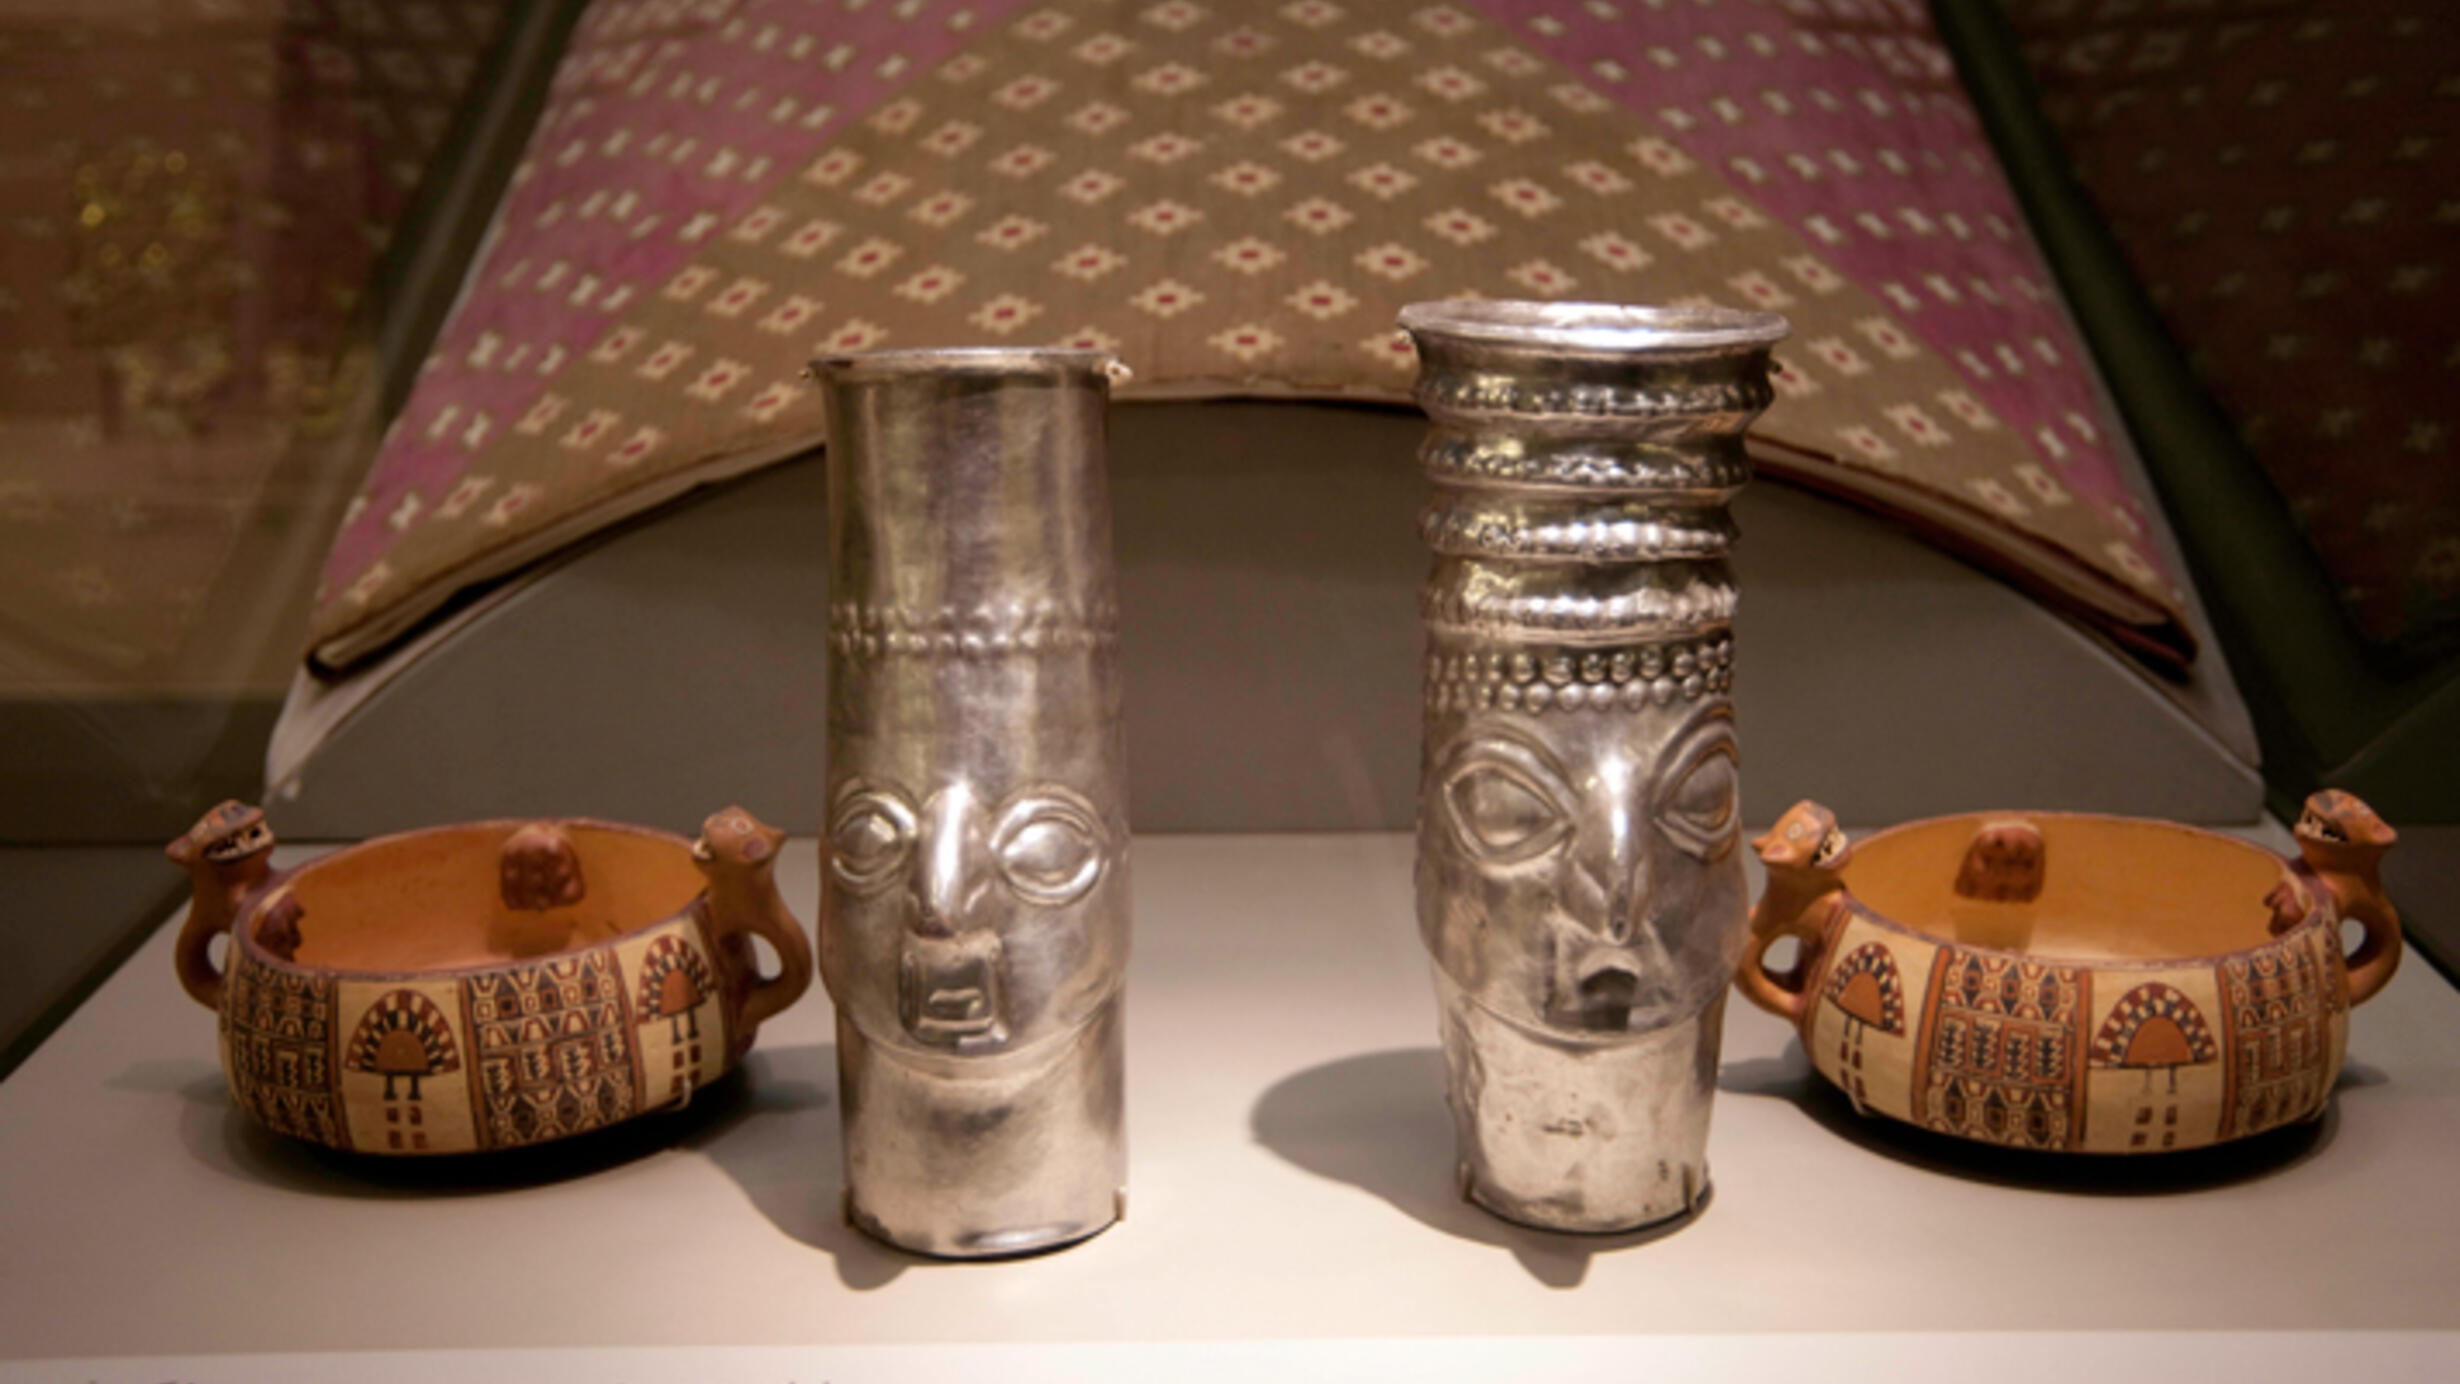 On a display table, two silver cylindric vessels decorated with face carvings and two bowls with intricately carved handles and painted designs.